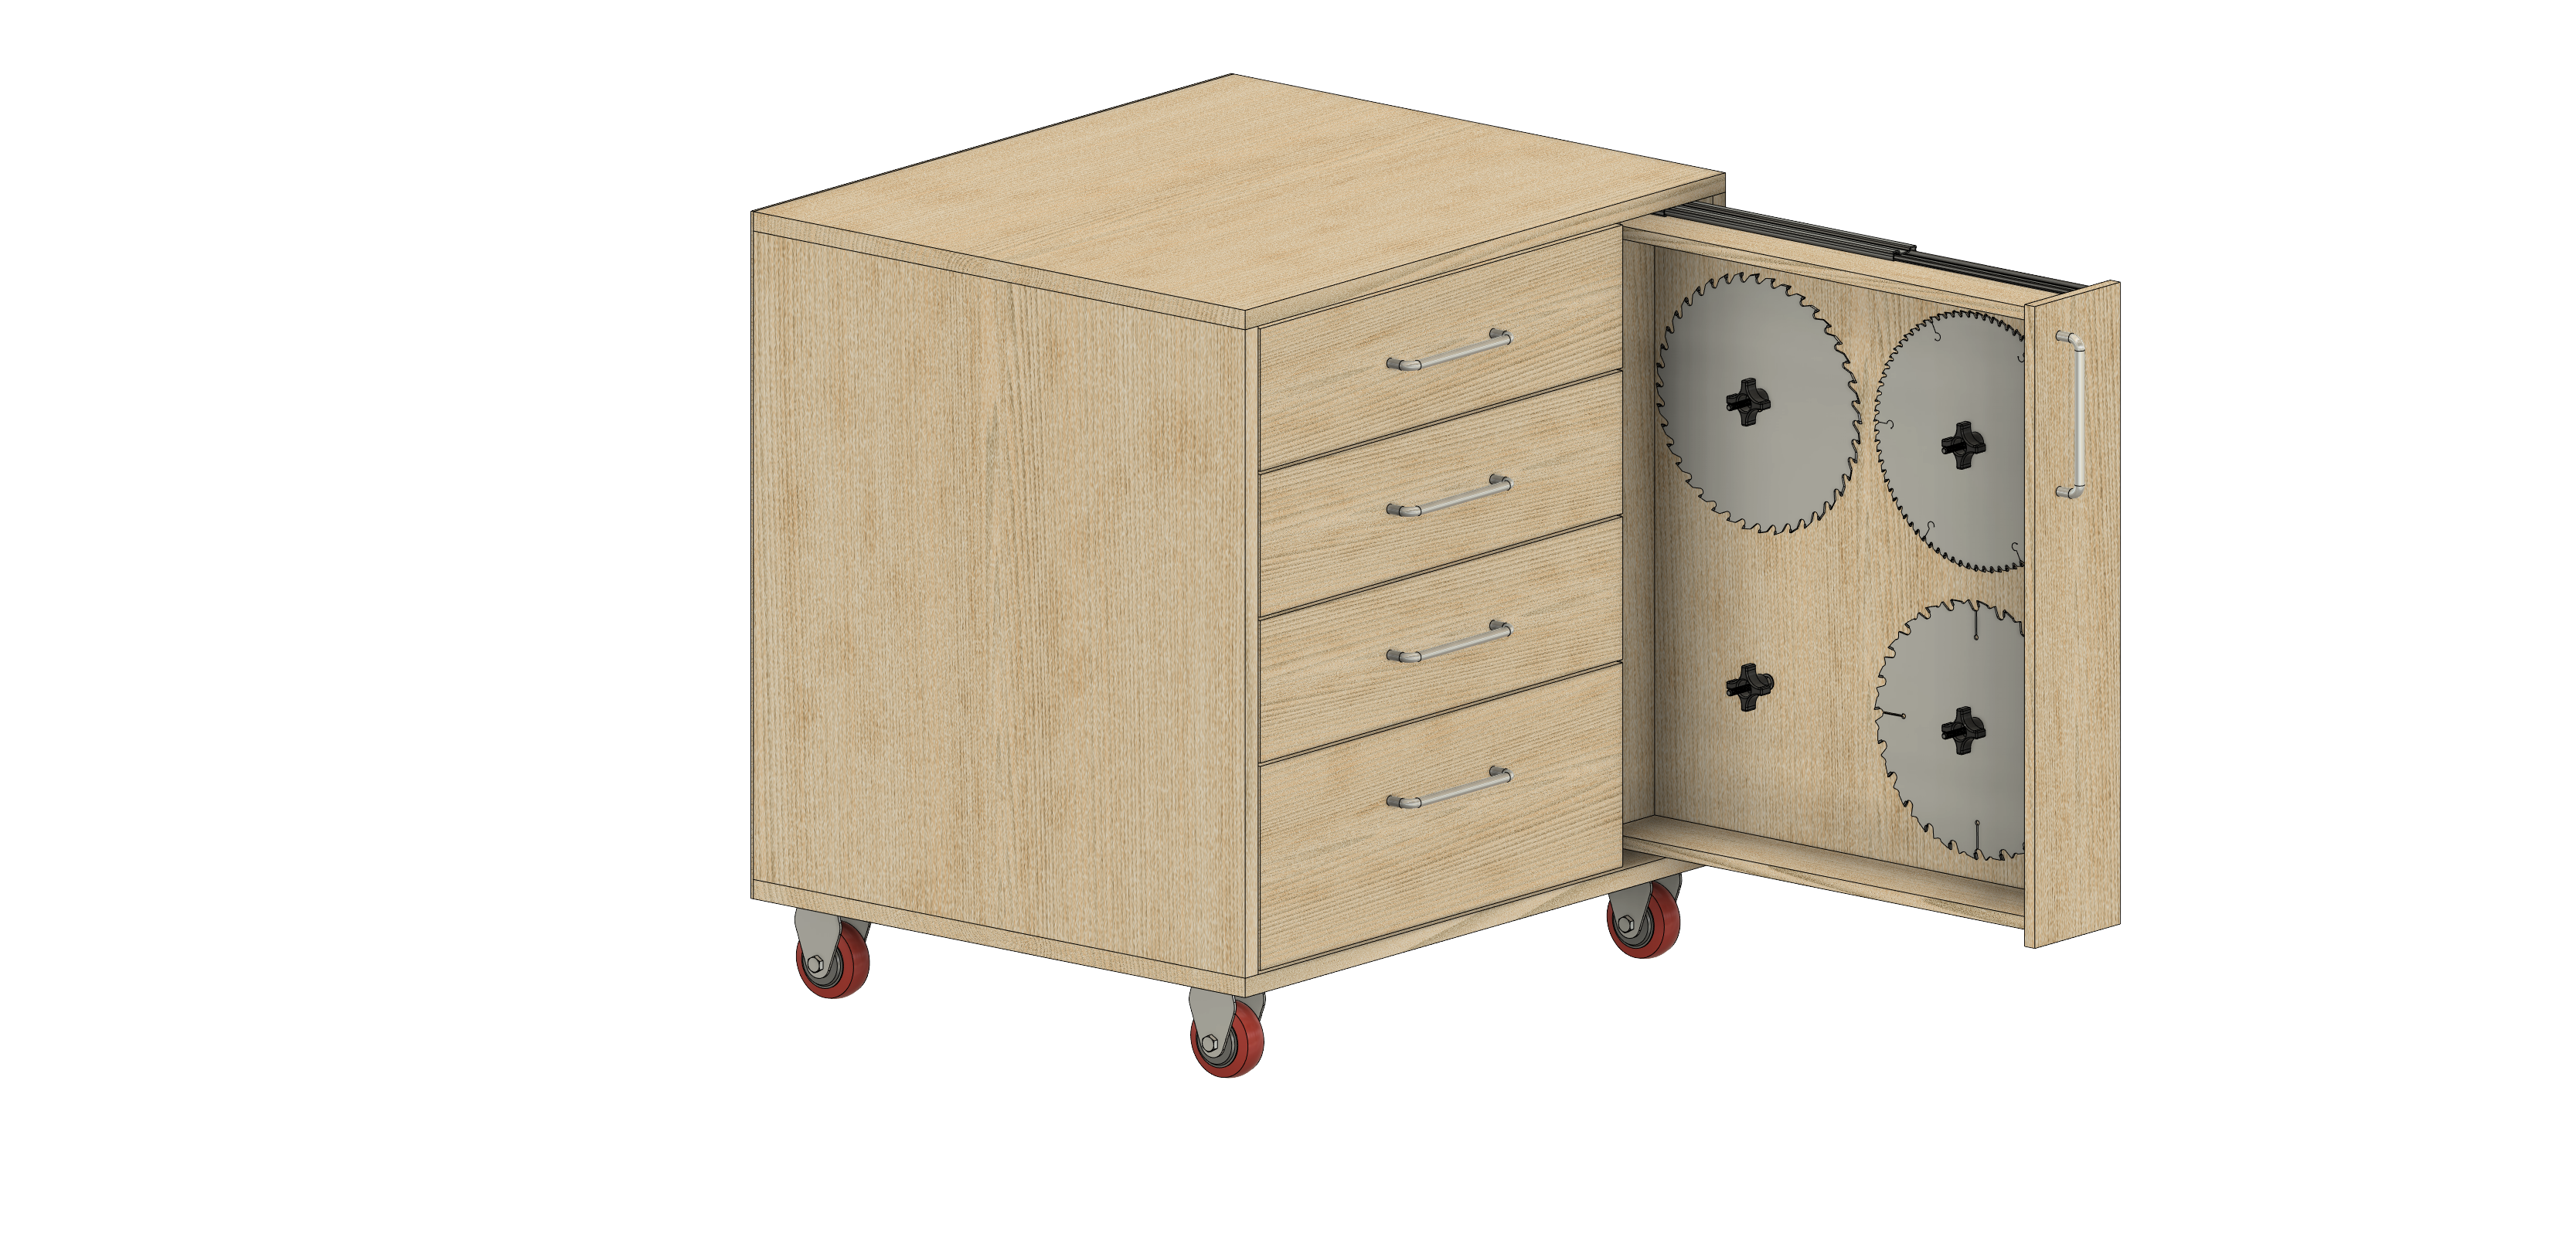 Under Table Saw Storage Cabinet Plans